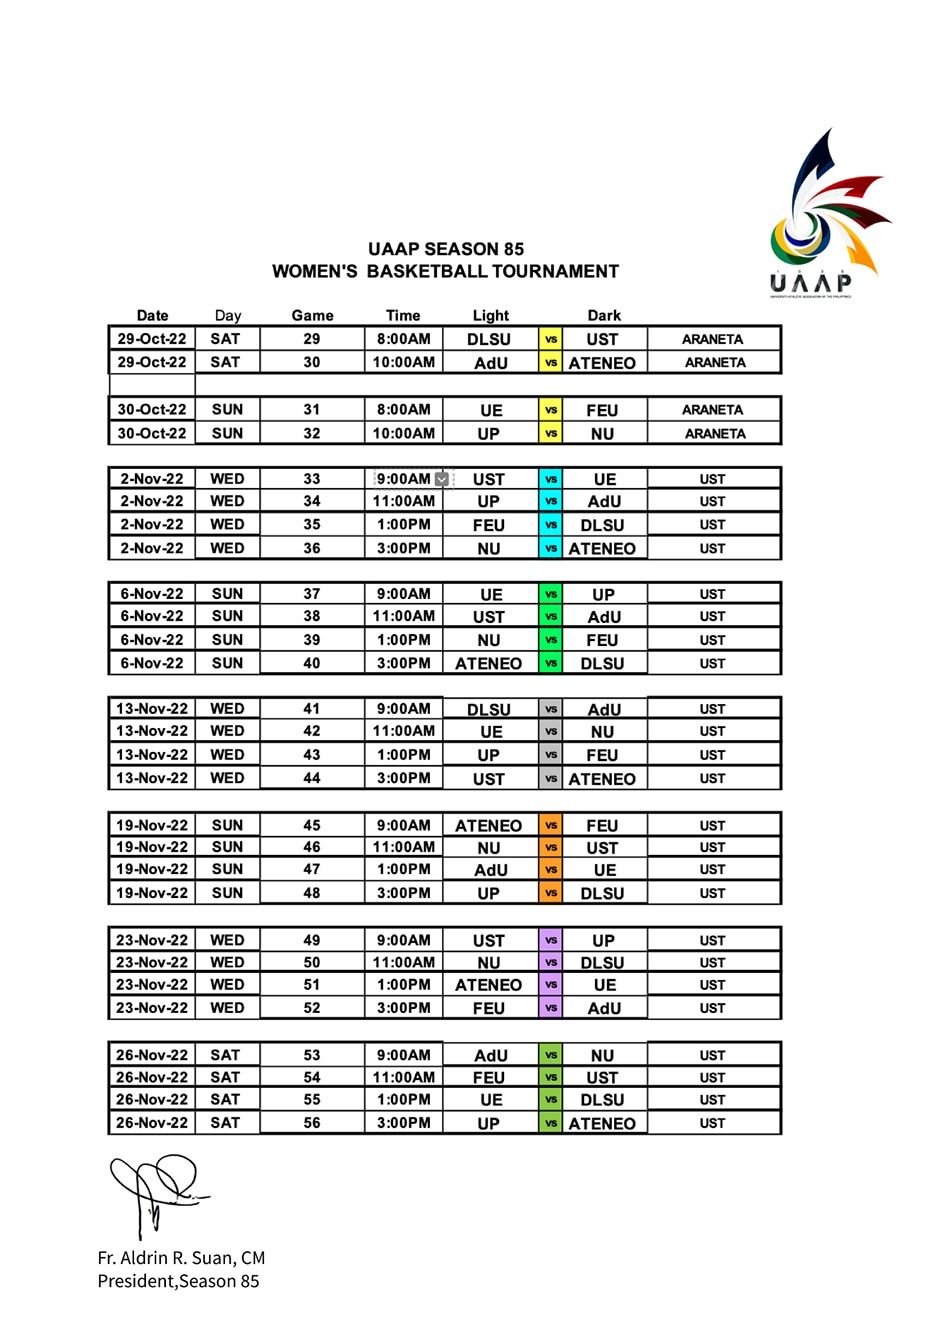 LOOK UAAP unveils 2nd round schedule for Season 85 ABSCBN News